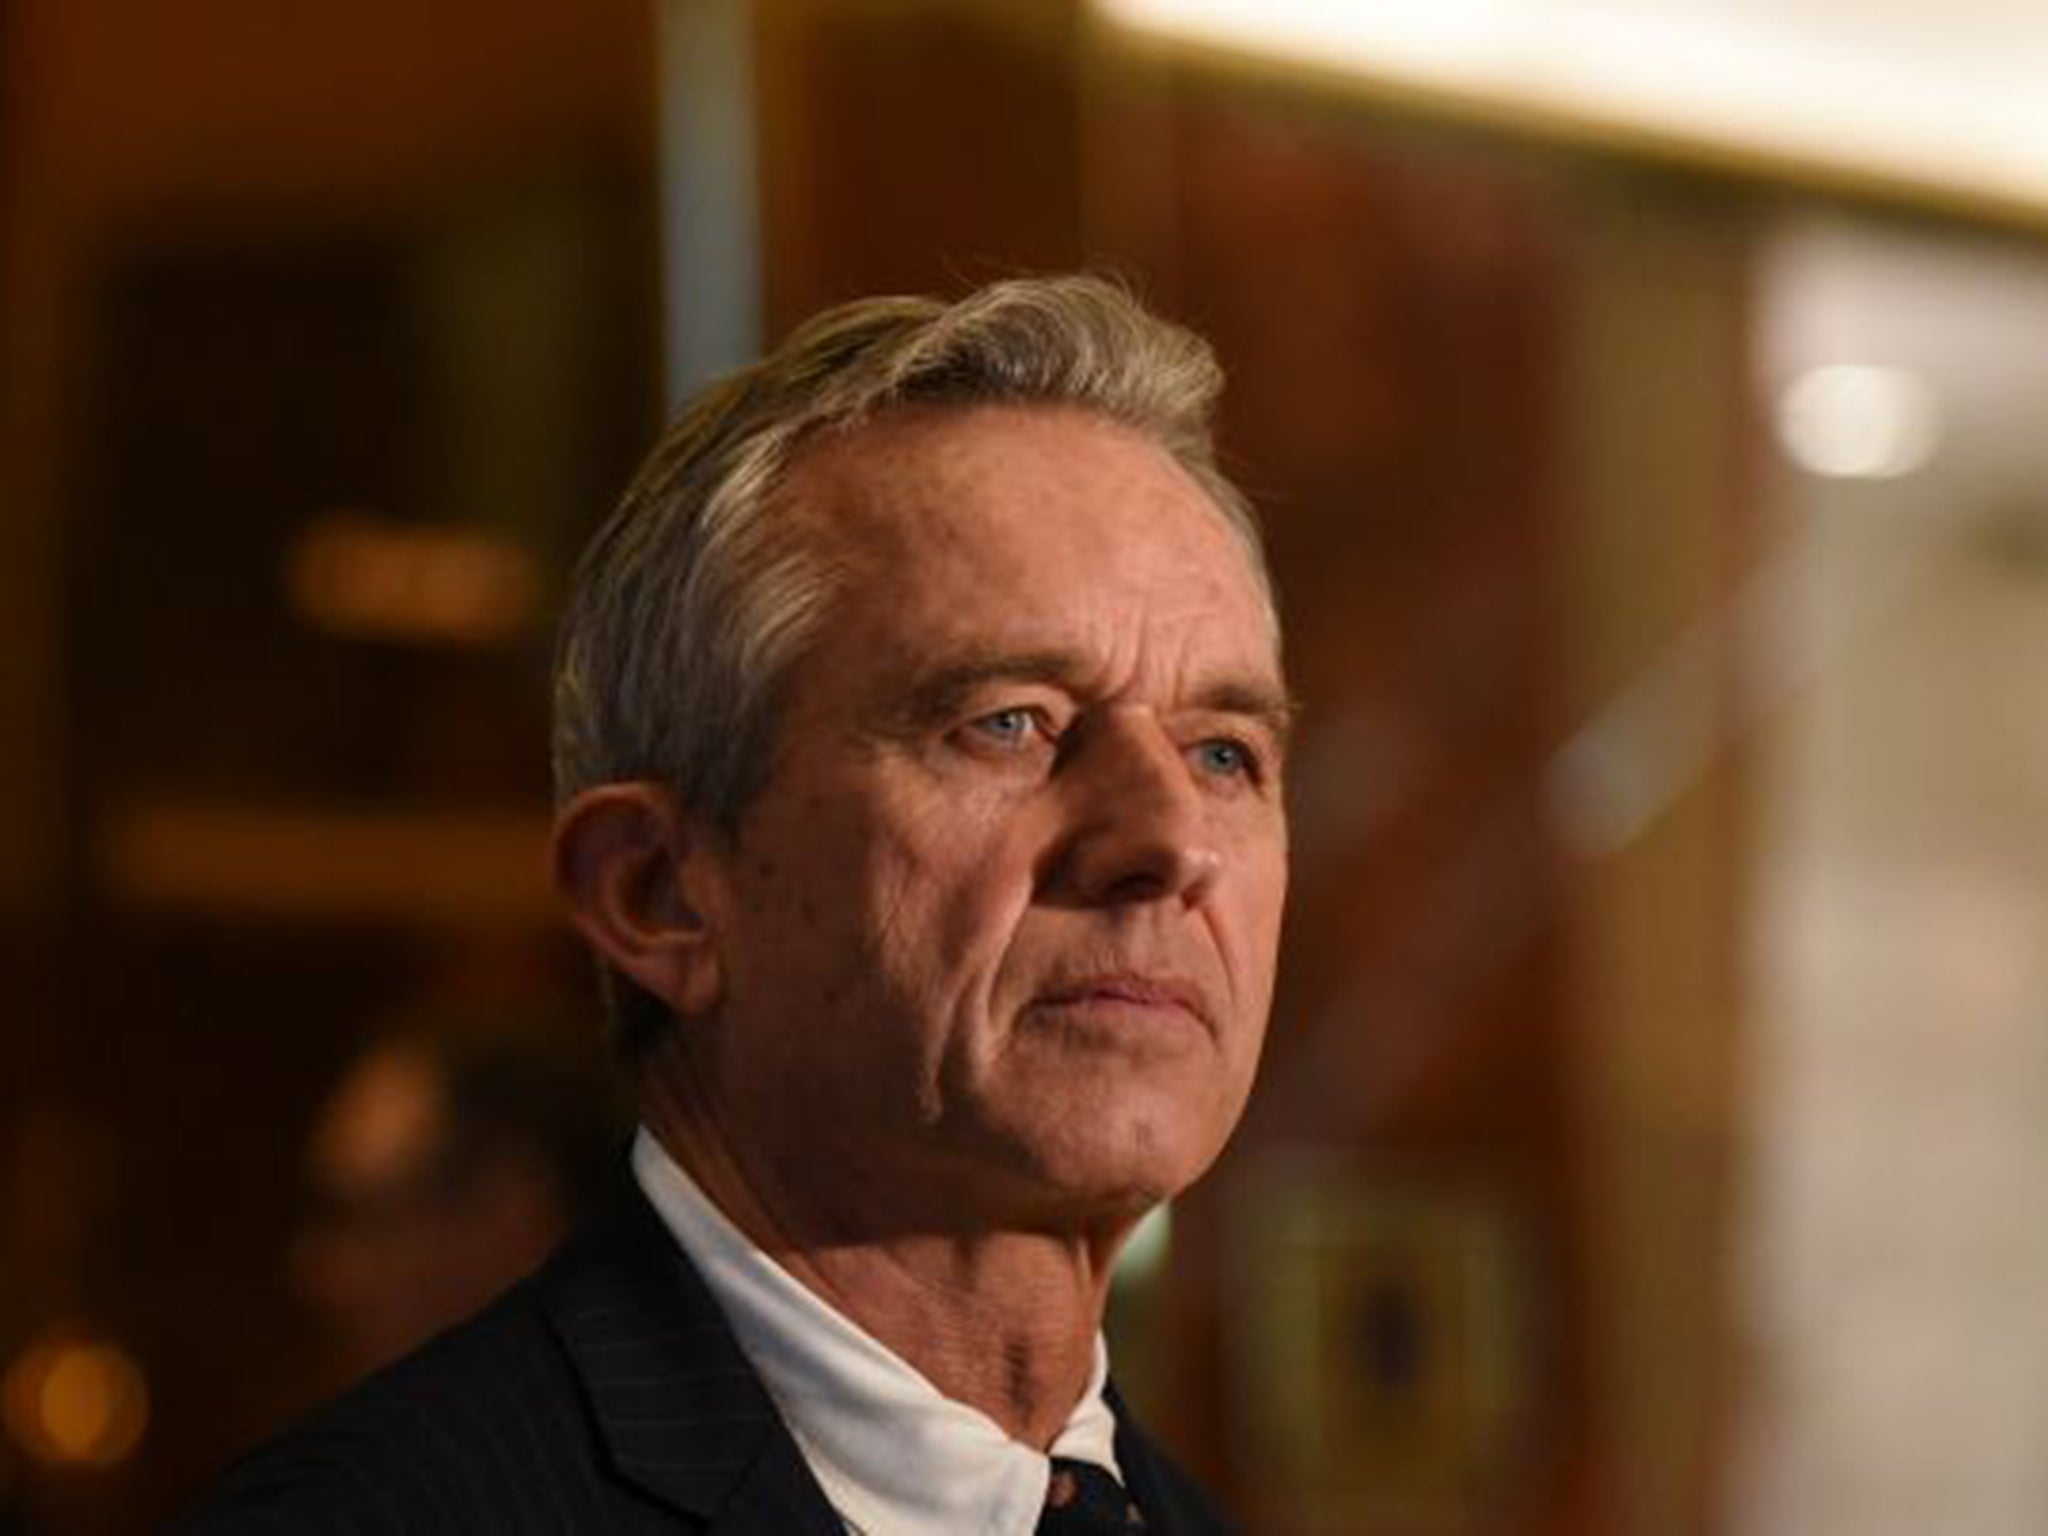 Robert F Kennedy Jr is son of the assassinated senator and nephew of the assassinated president JFK